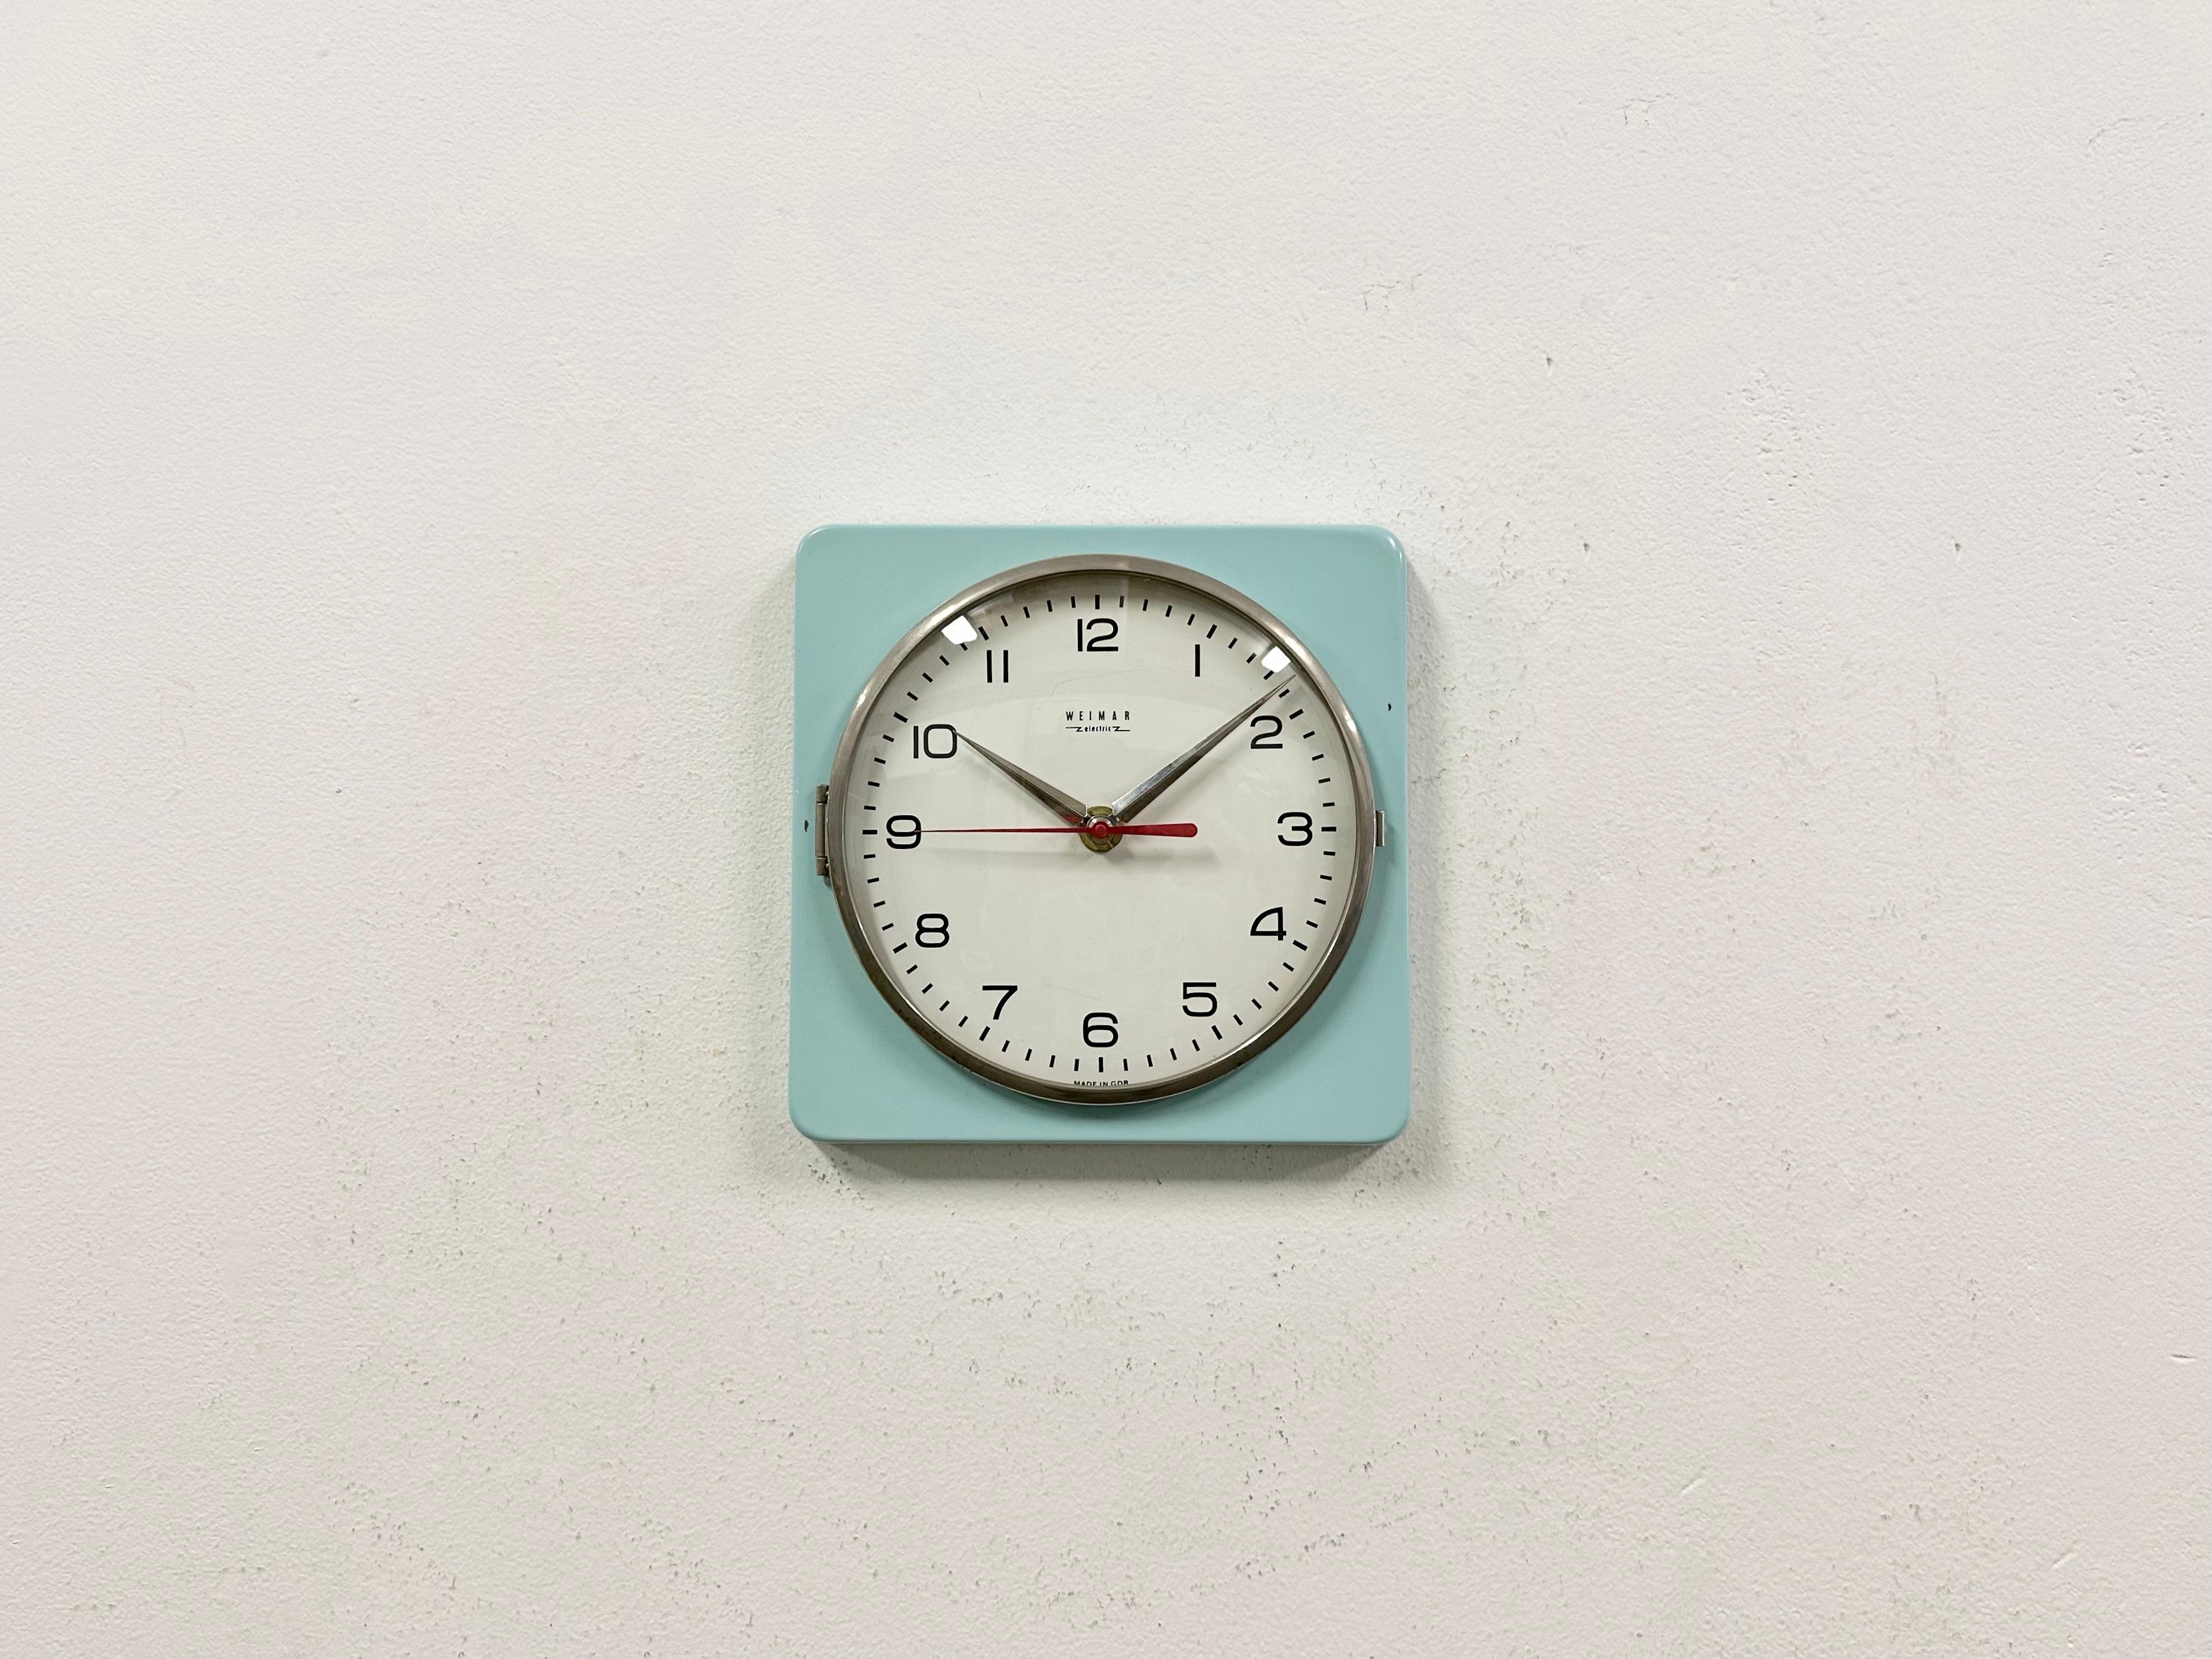 Vintage Industrial wall clock produced by Weimar Electronic in former East Germany during the 1970s. It features a turquoise iron body, an aluminium hands and a curved clear glass cover with brass frame.The battery-powered clockwork requires one AA